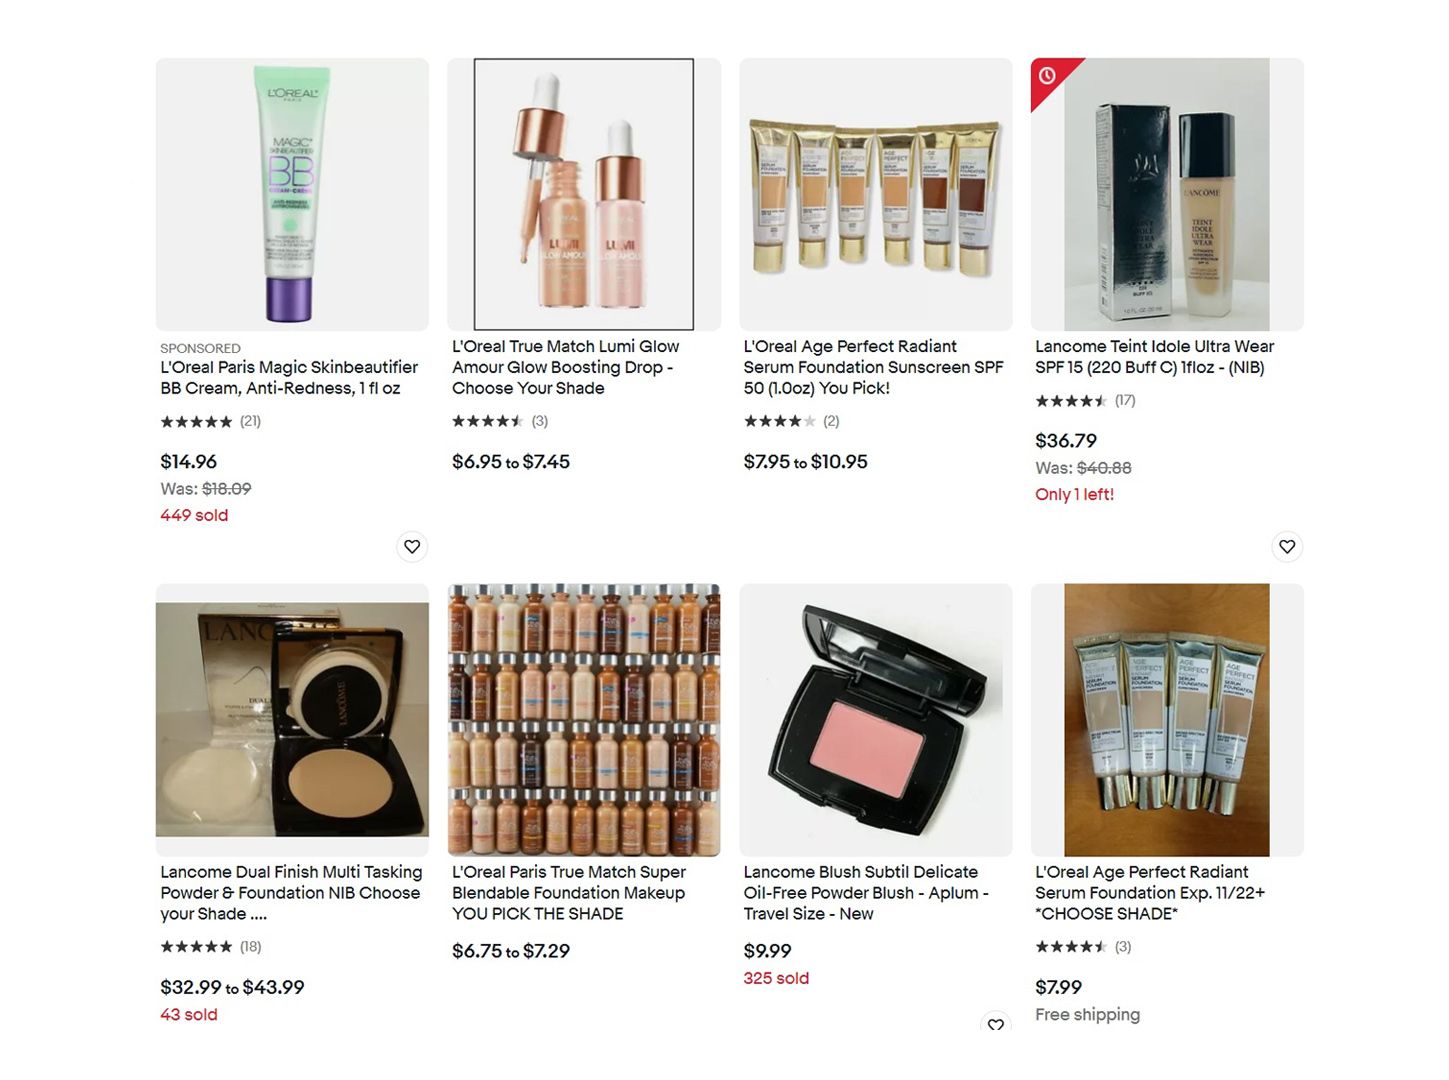 The Most Popular Beauty Brands on Second-Hand Goods Sites